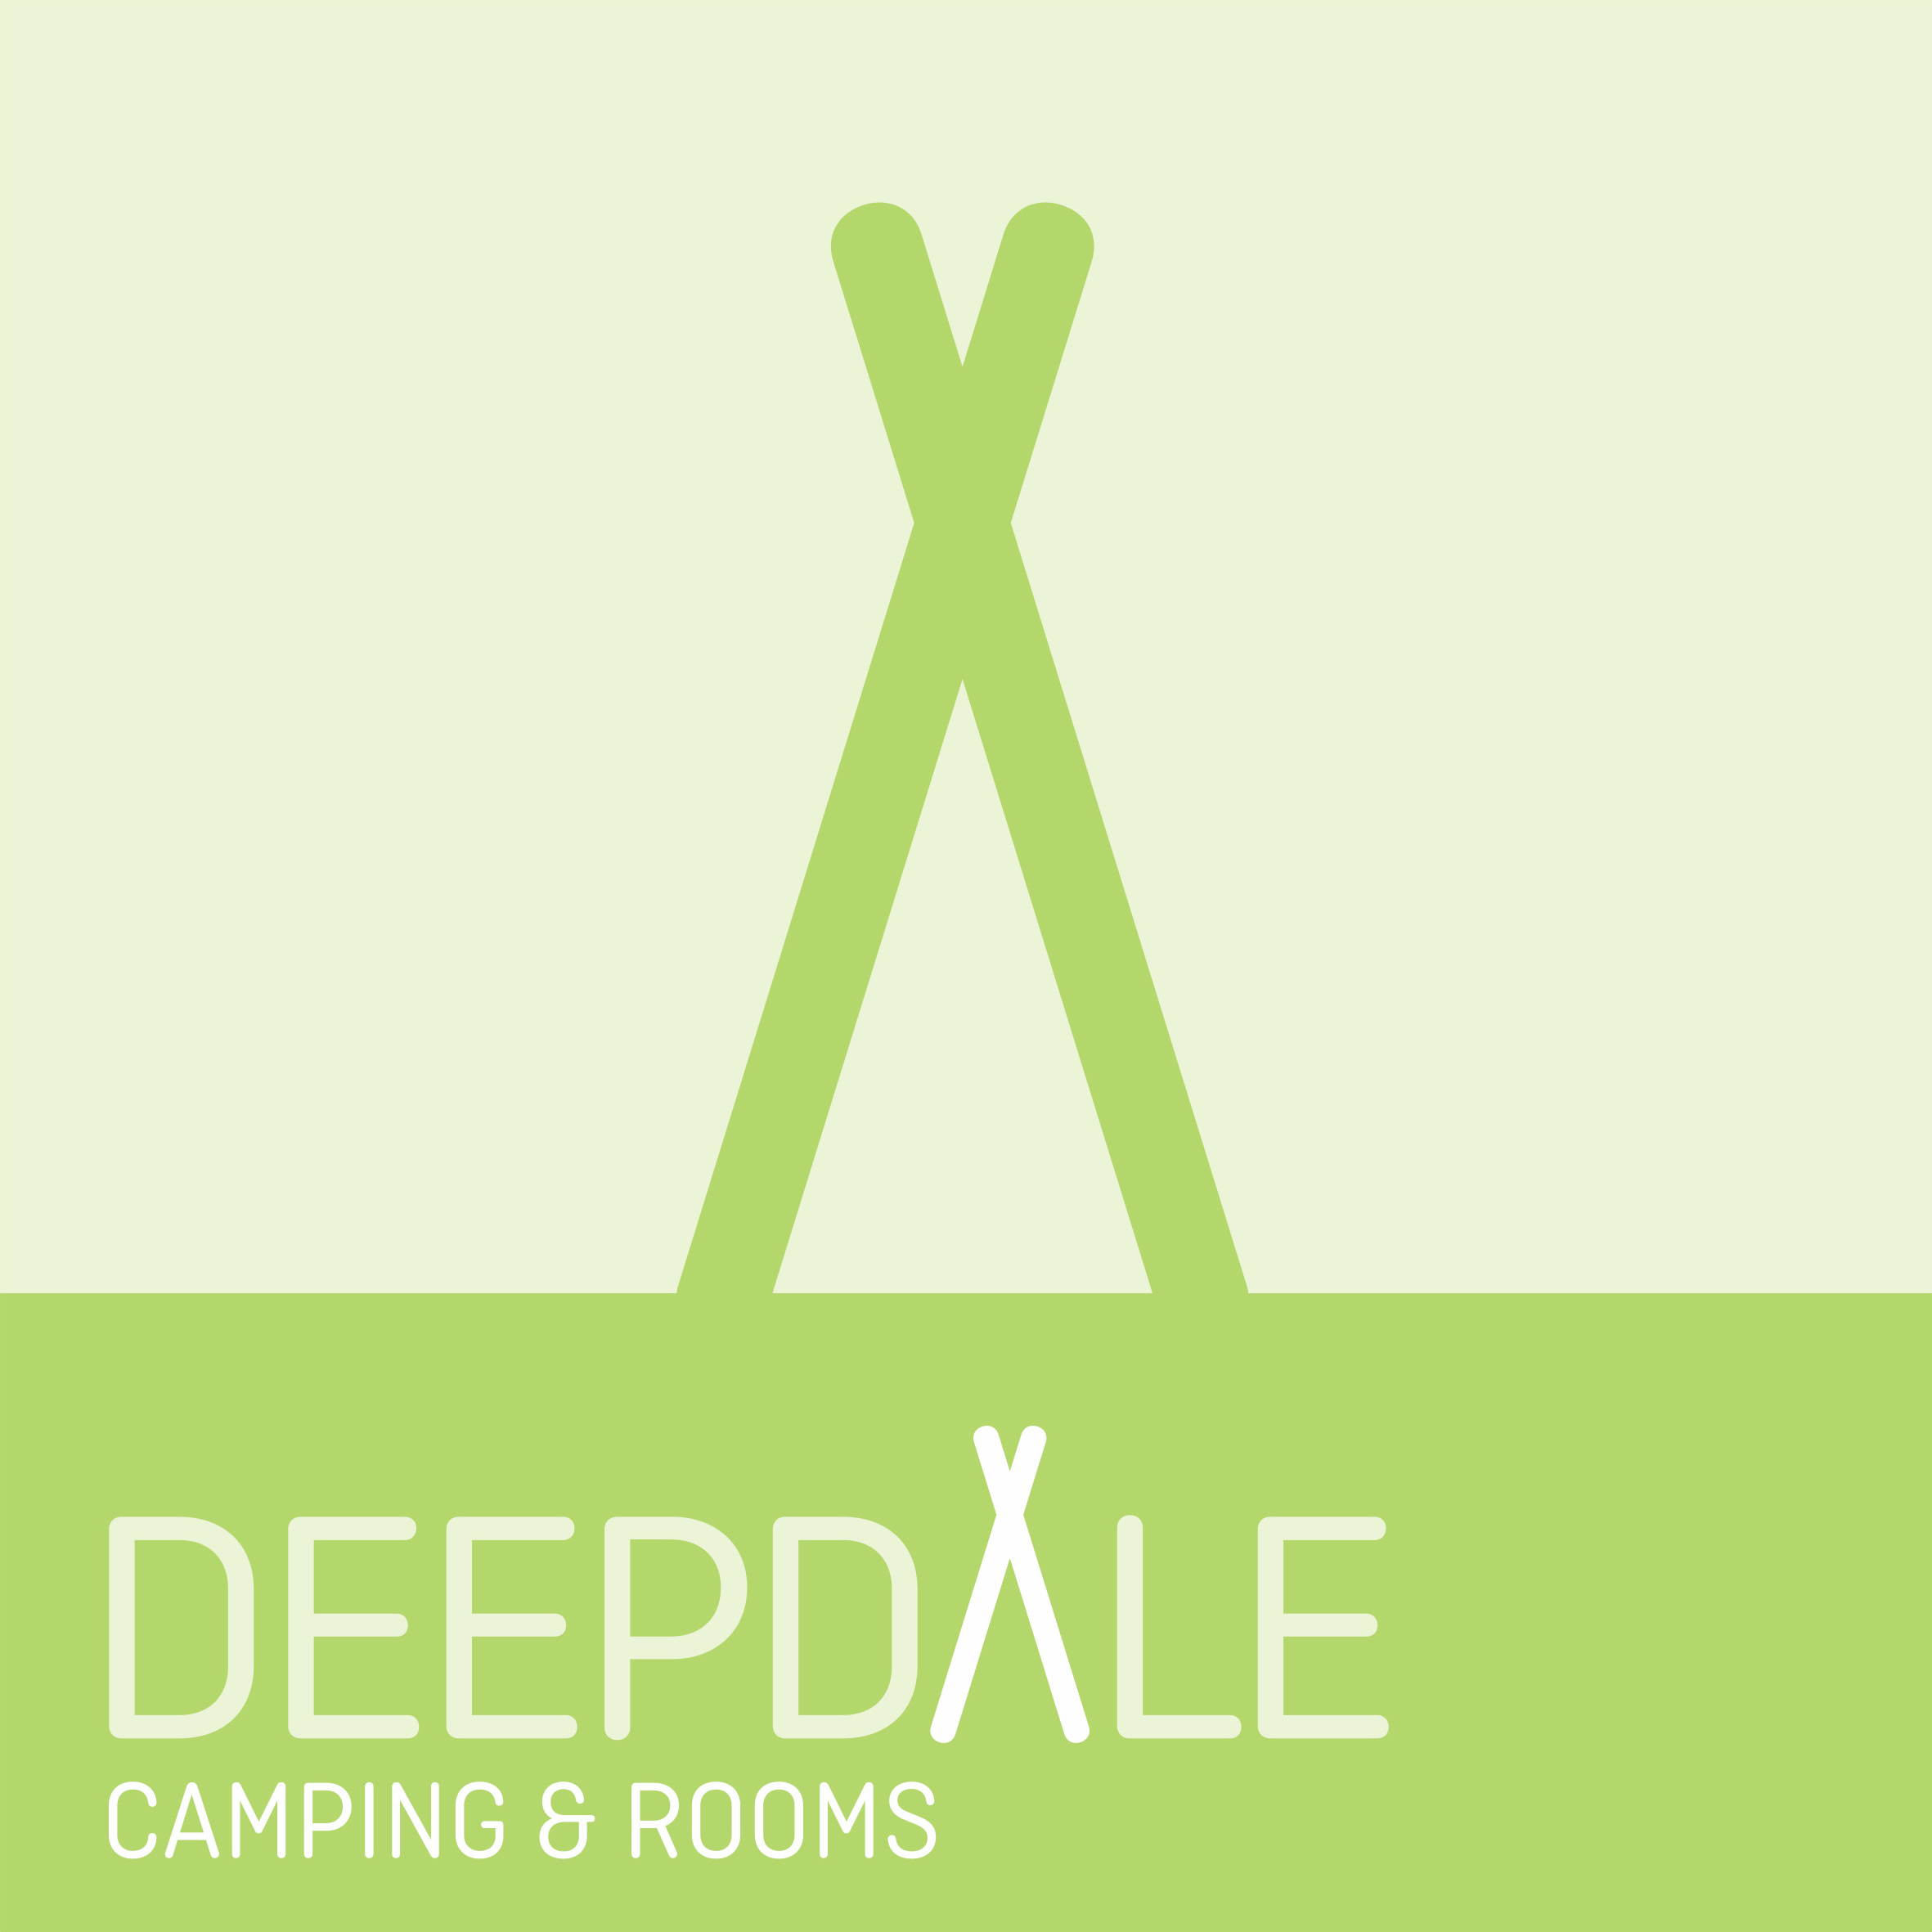 Deepdale Camping and Rooms Profile Pic